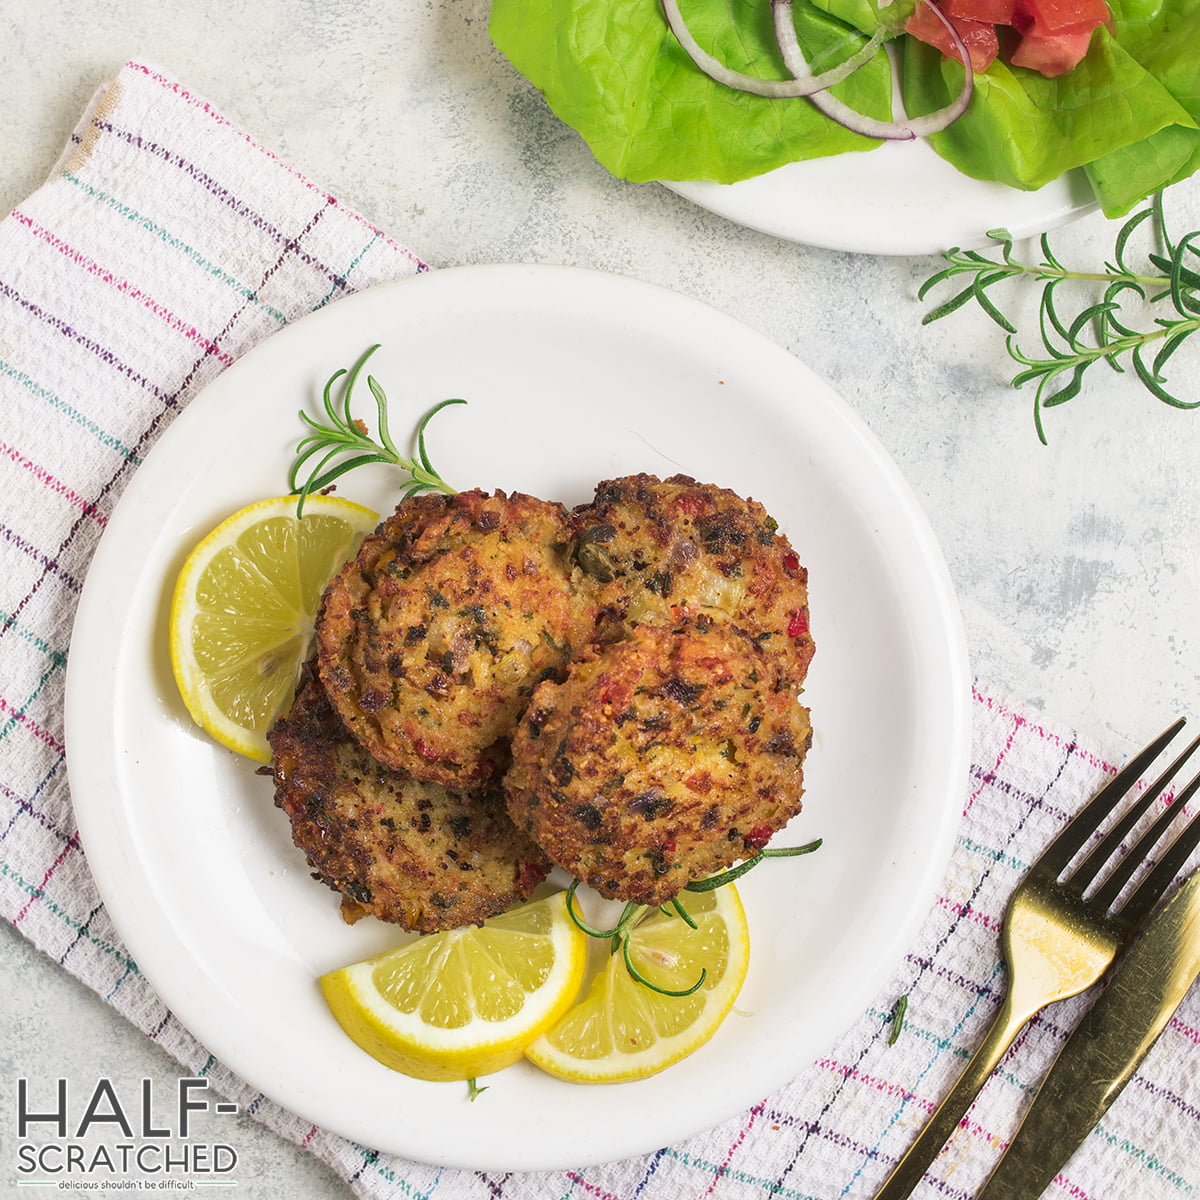 Top view of crab cakes with lemon slices